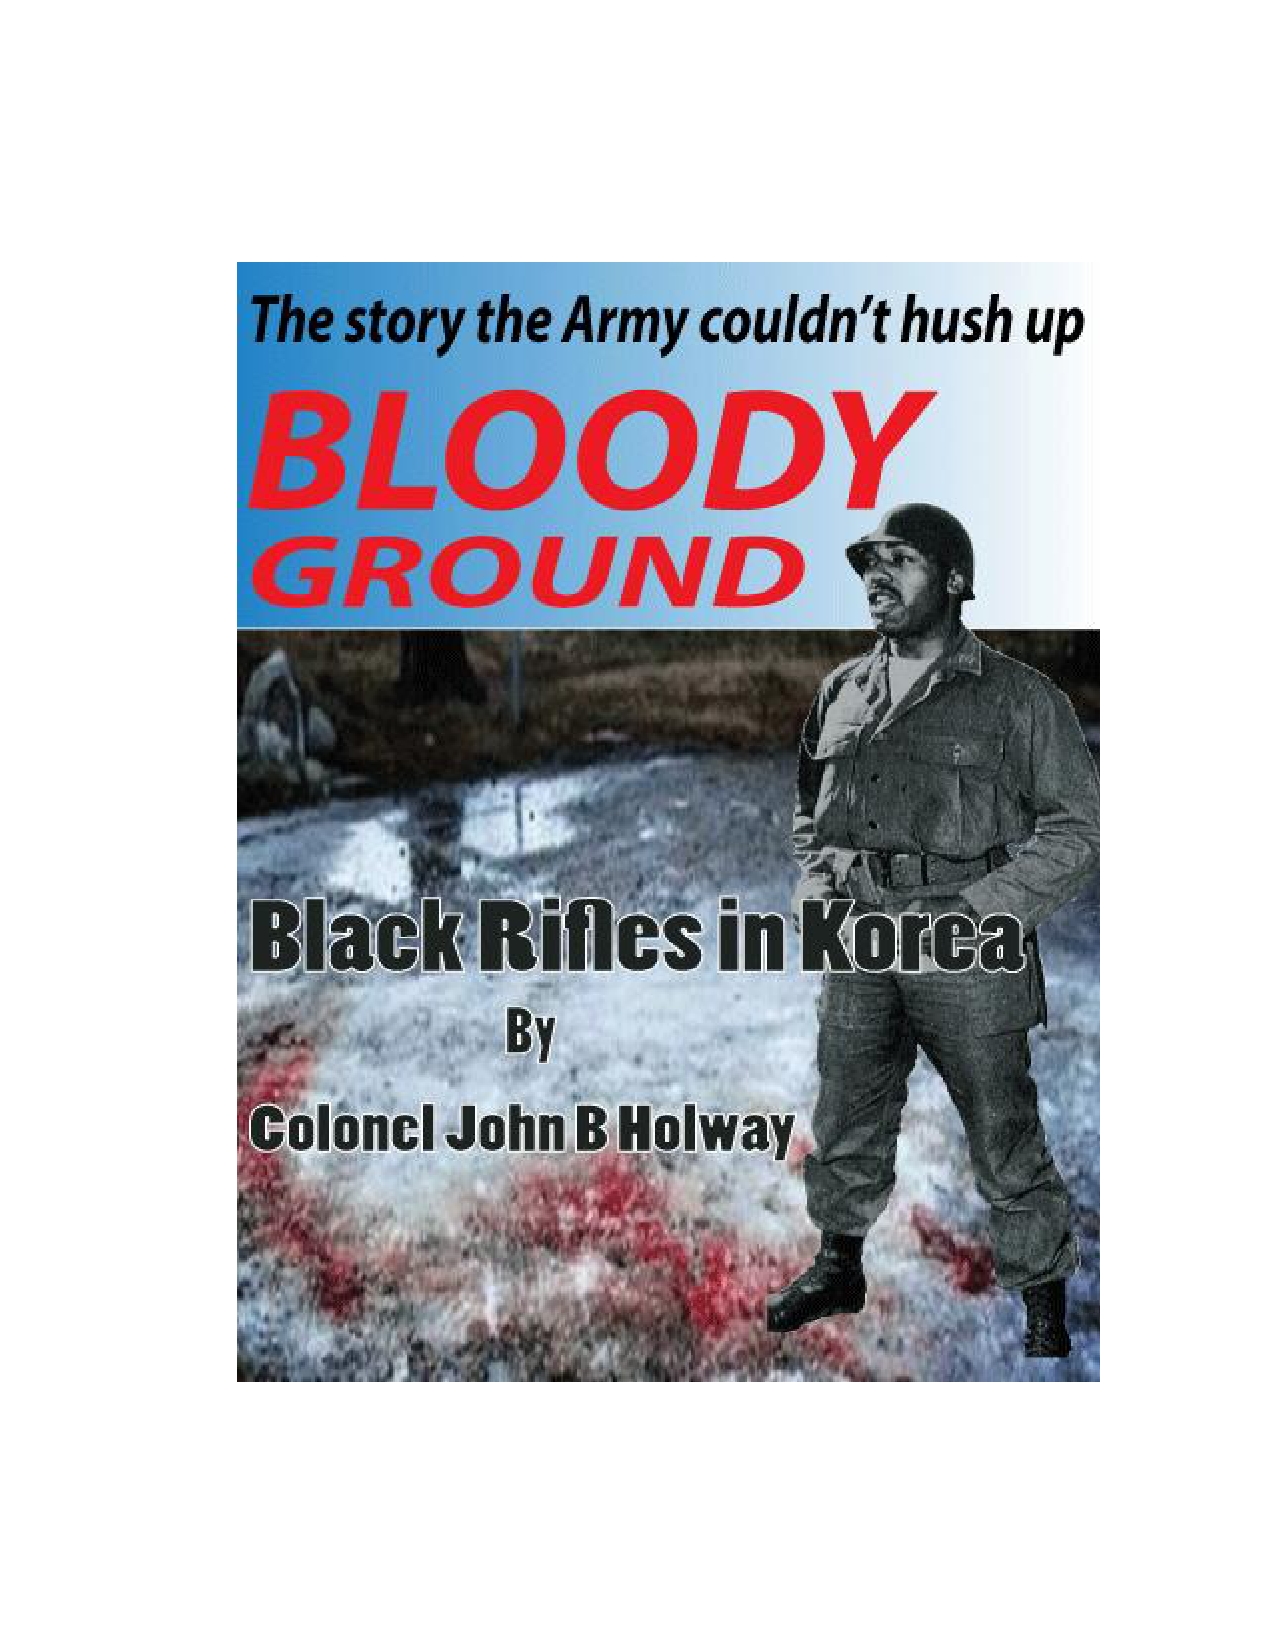 Free Korean War Book for Veteran’s Day: Bloody Ground, Black Soldiers Tell Their Stories